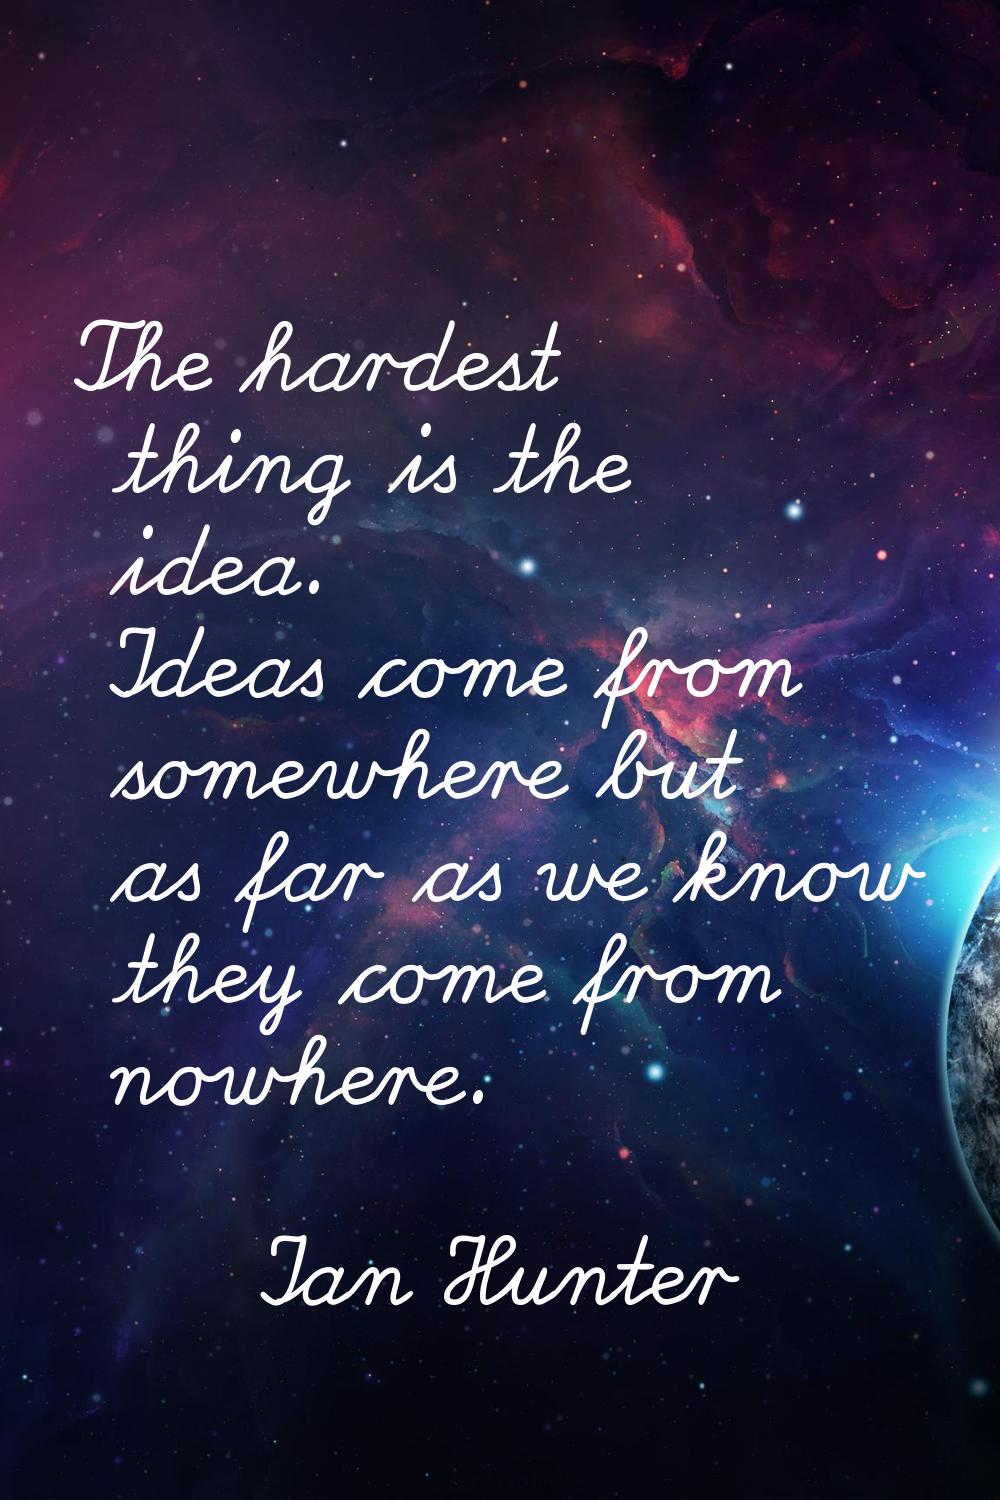 The hardest thing is the idea. Ideas come from somewhere but as far as we know they come from nowhe